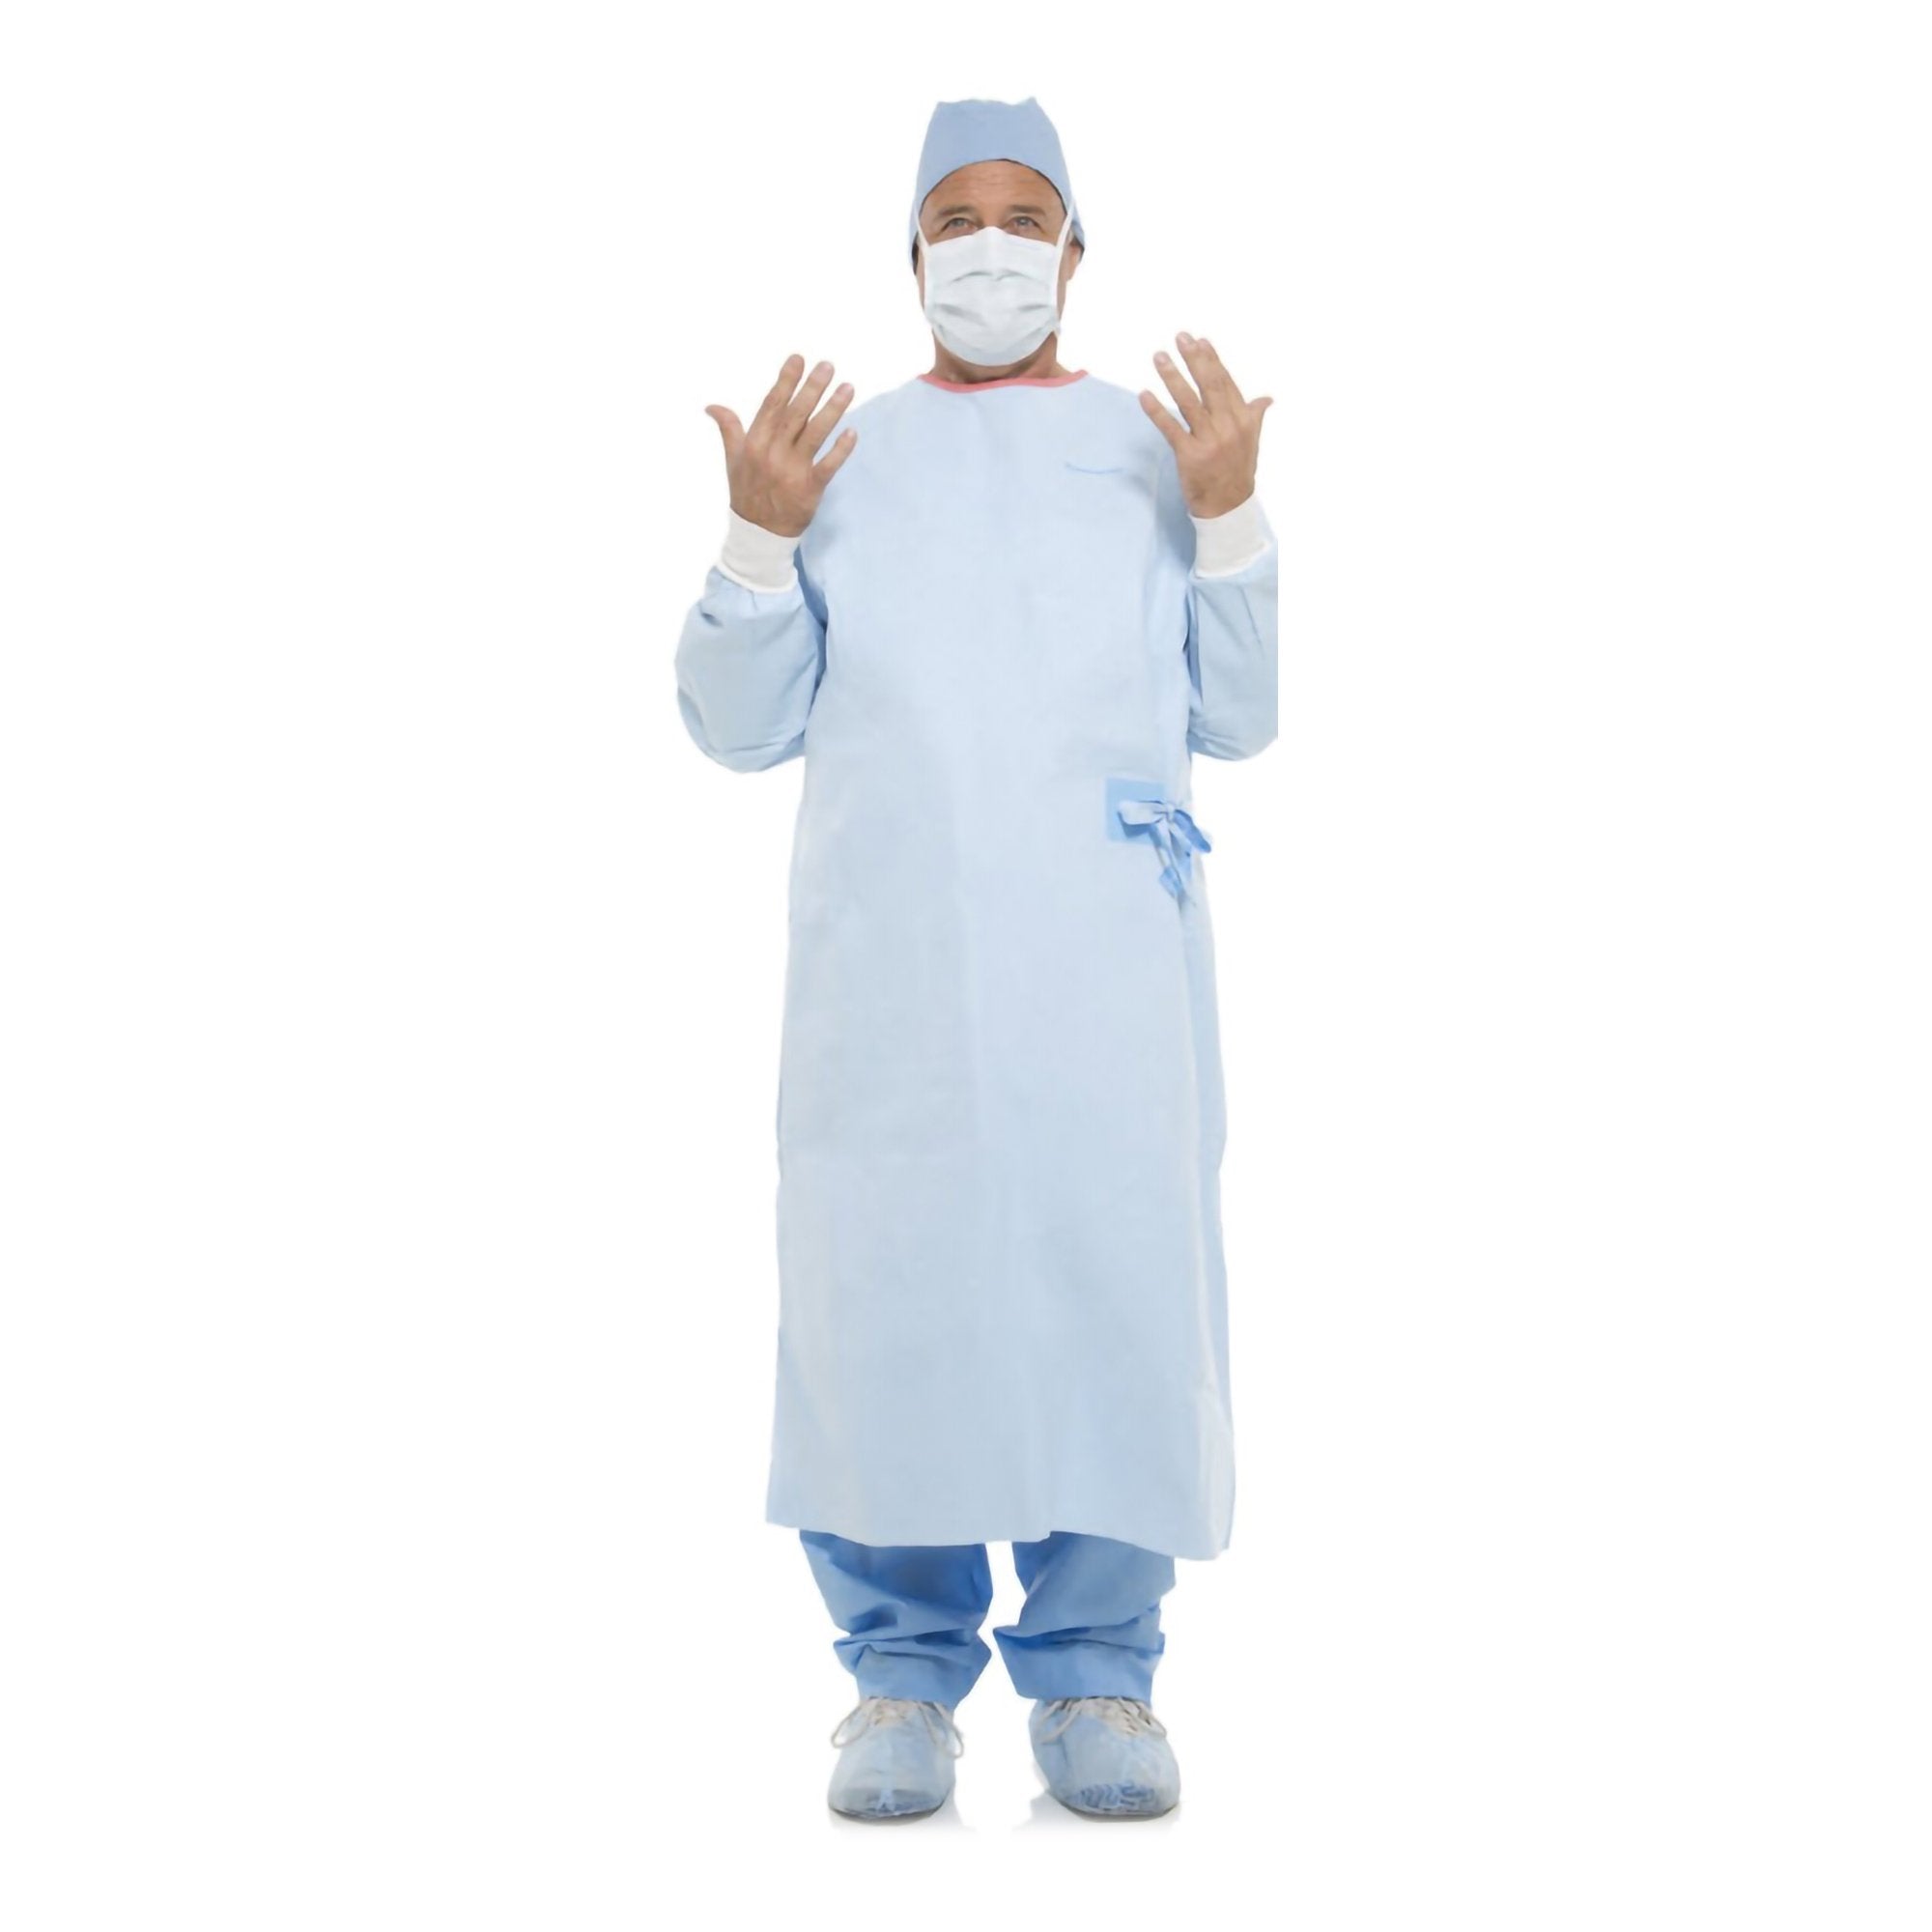 MICROCOOL Non-Reinforced Surgical Gown With Towel